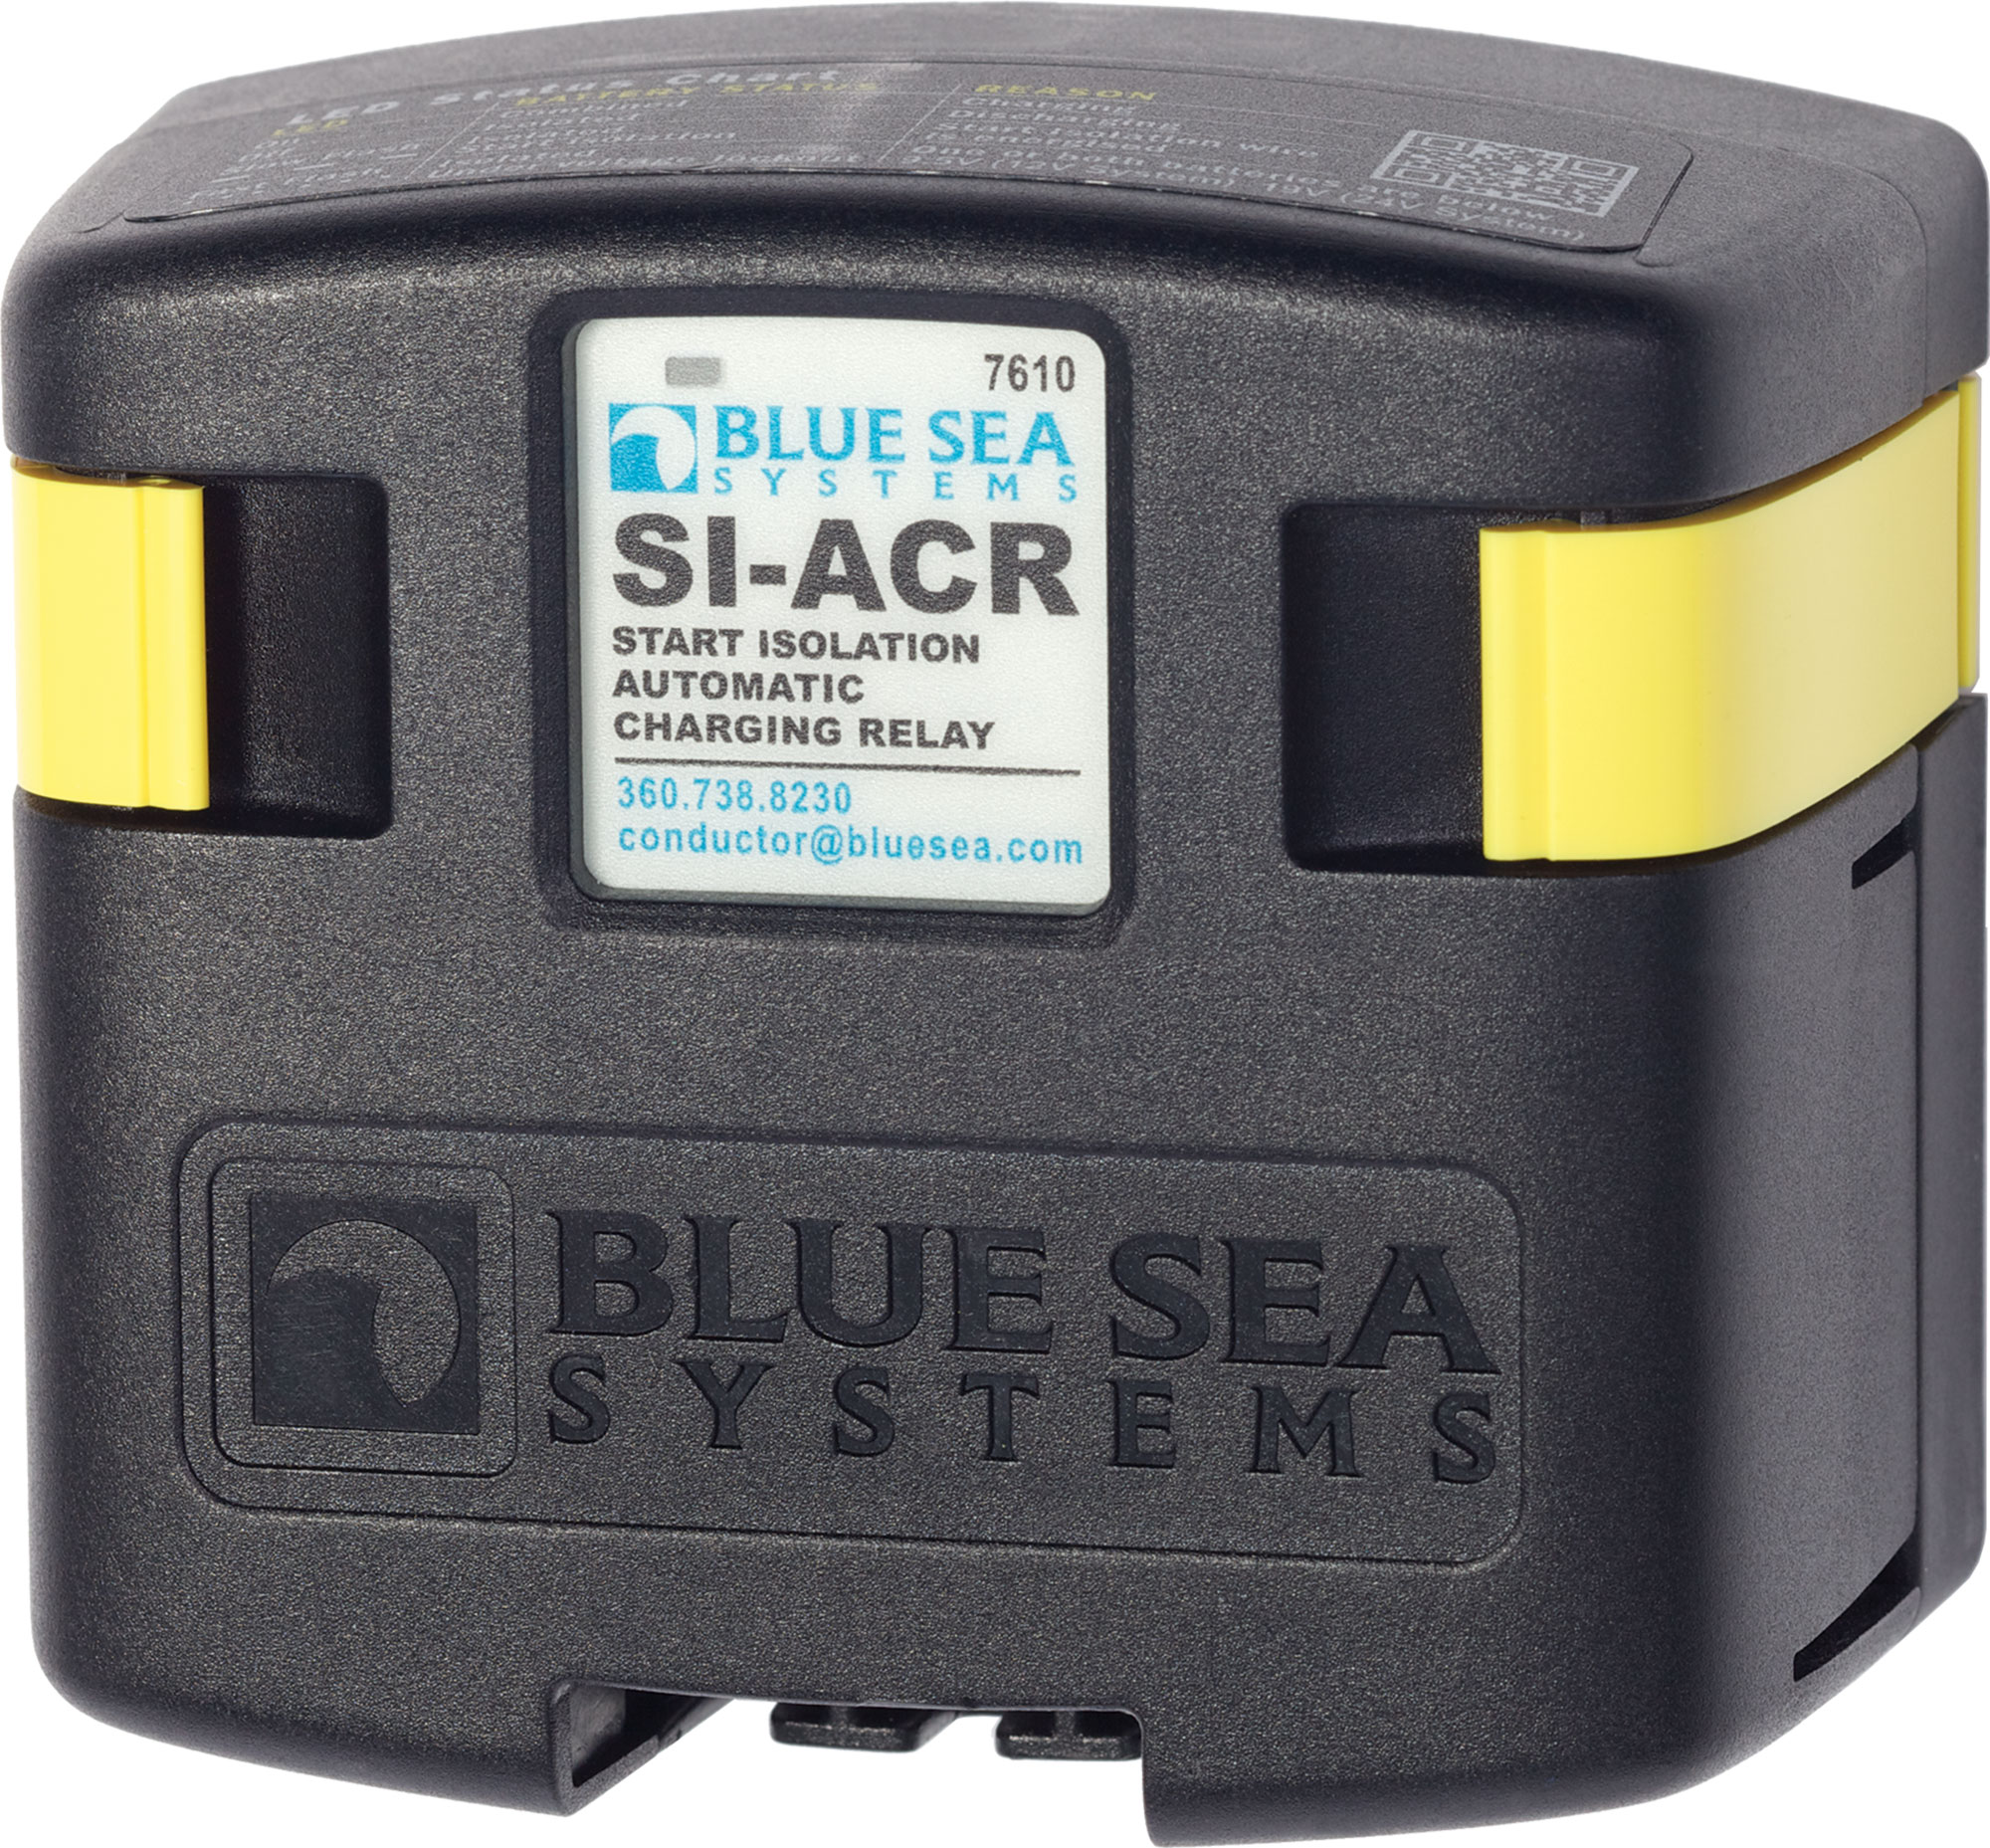 Part # 7610B  Manufacturer Blue Sea Systems  Product Type Battery Solenoid